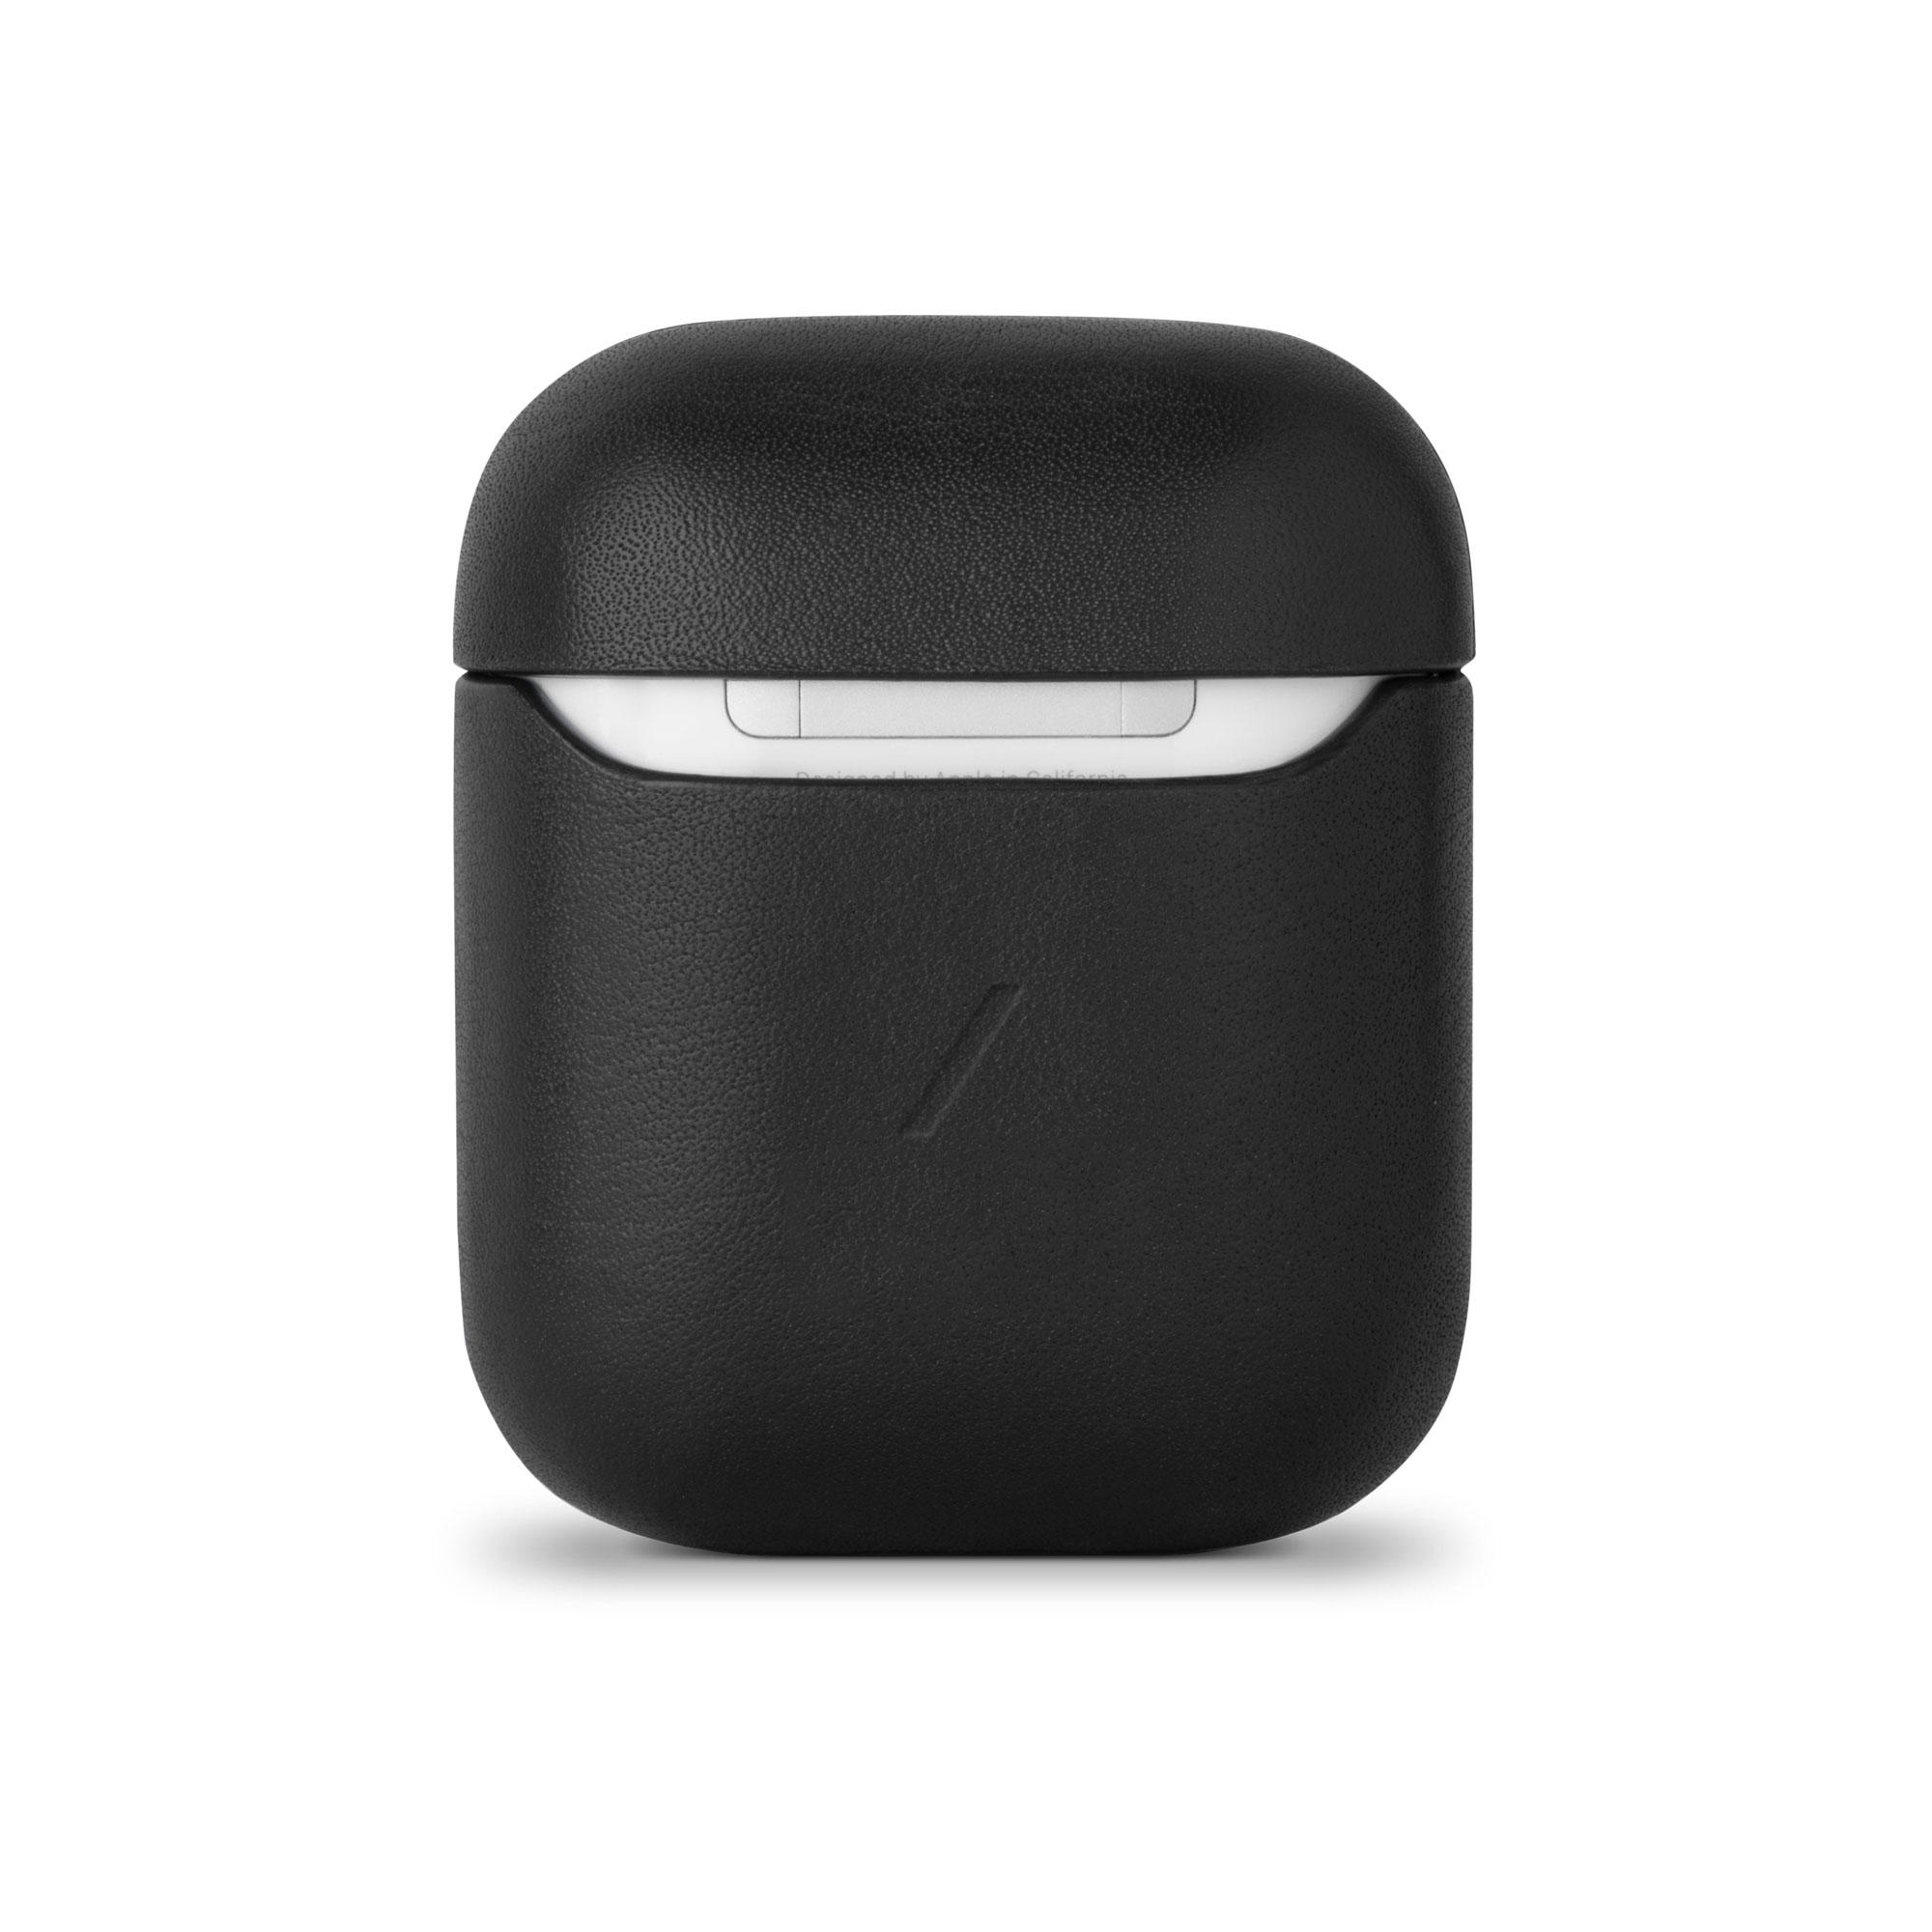 Airpod Case Leather Black